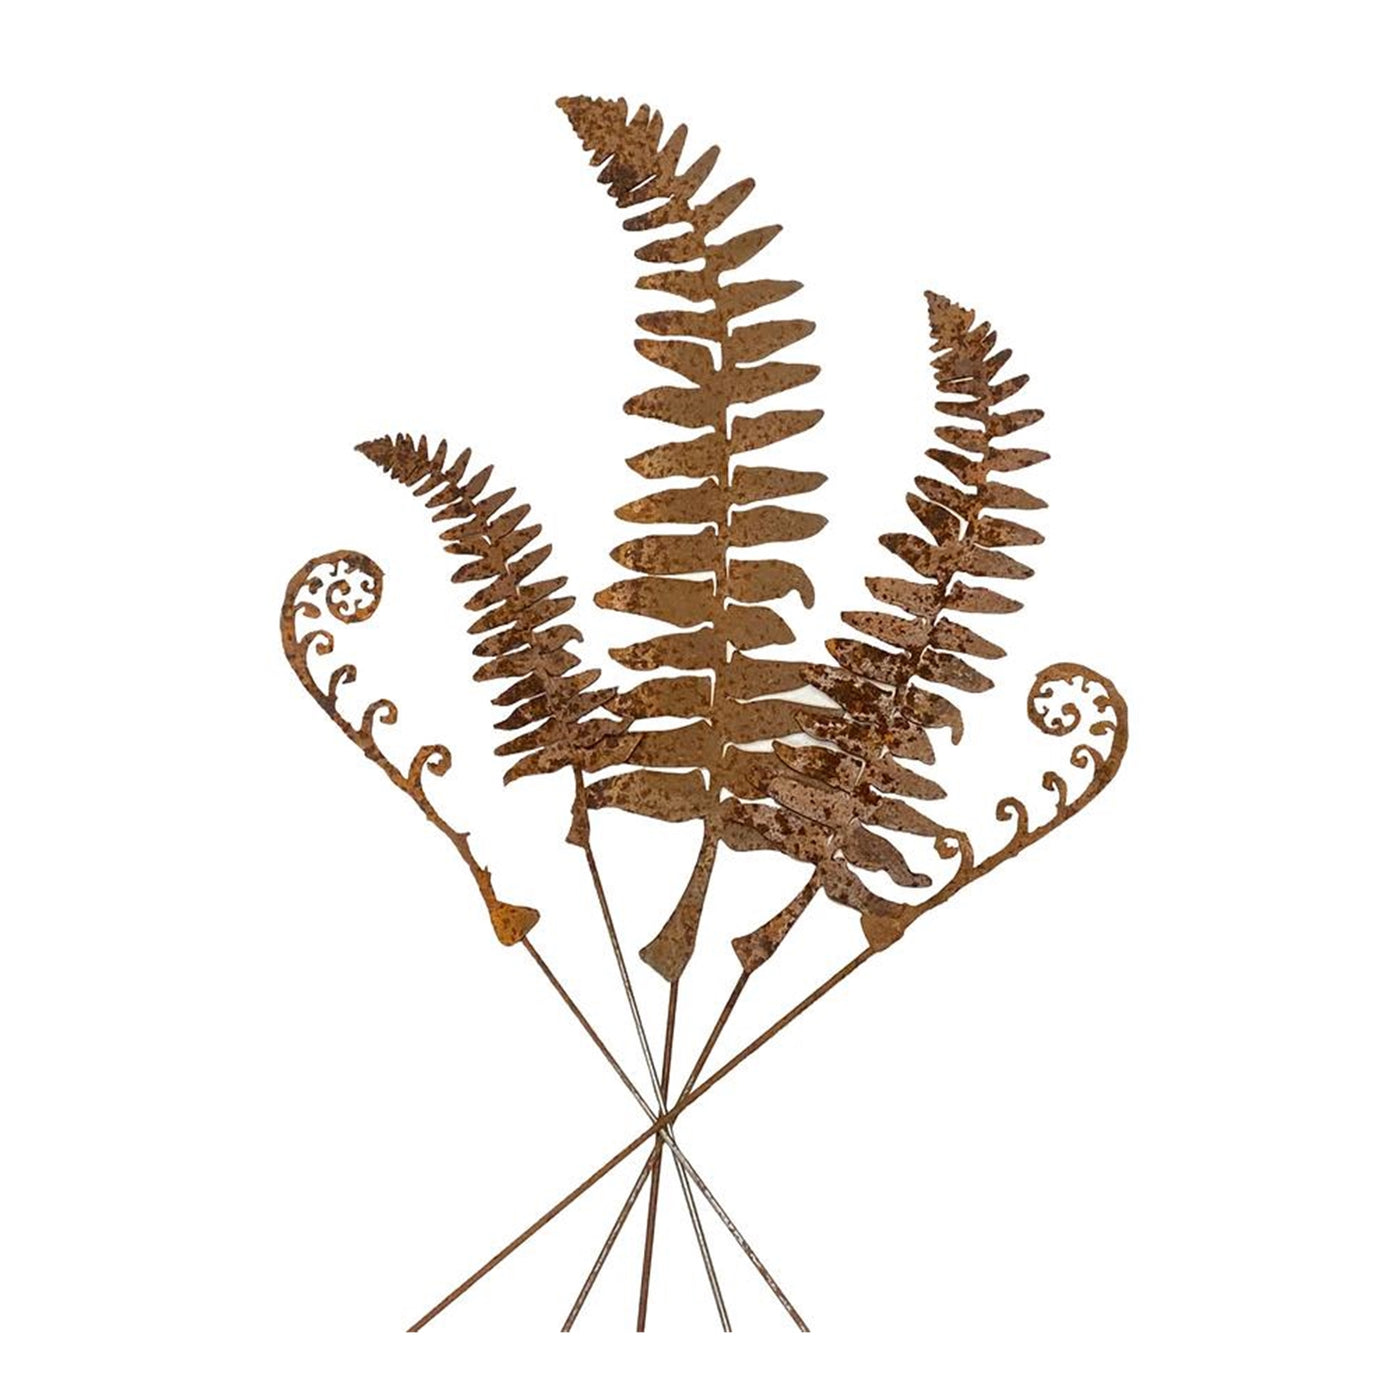 Fern Leaves and Frond Stake